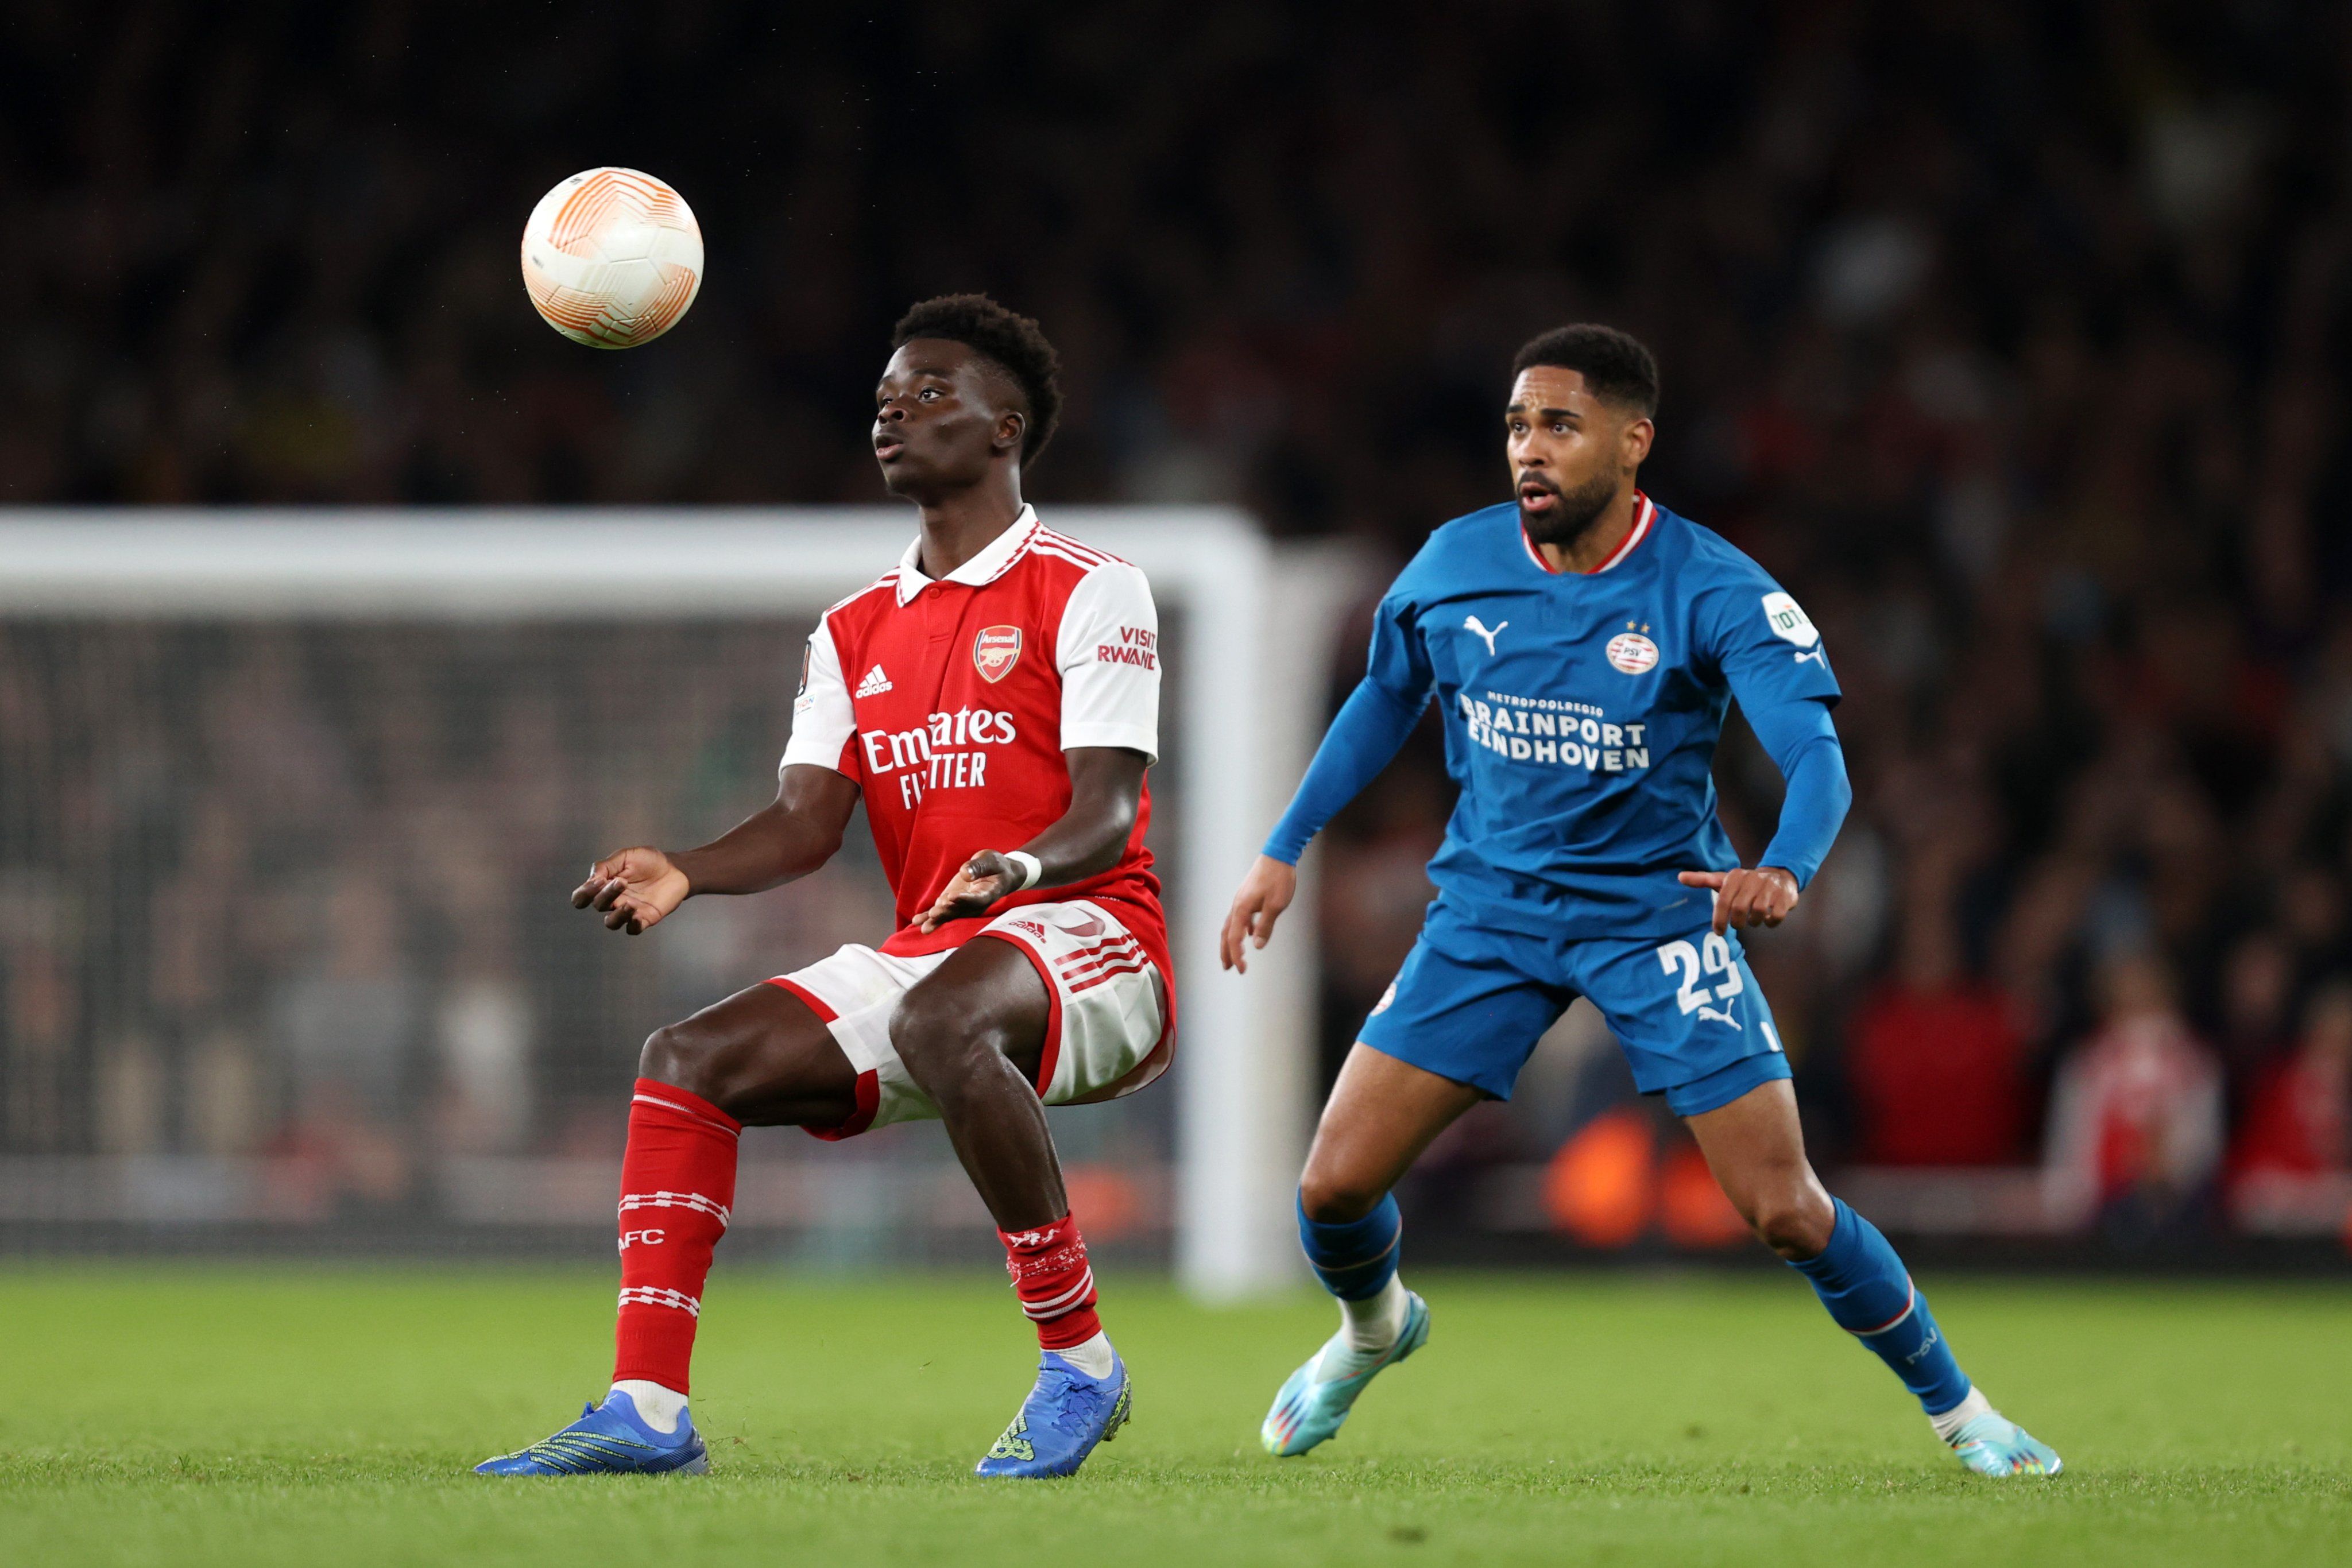 Southampton vs Arsenal: Prediction, Odds, Betting Tips, and How to Watch | 23/10/2022